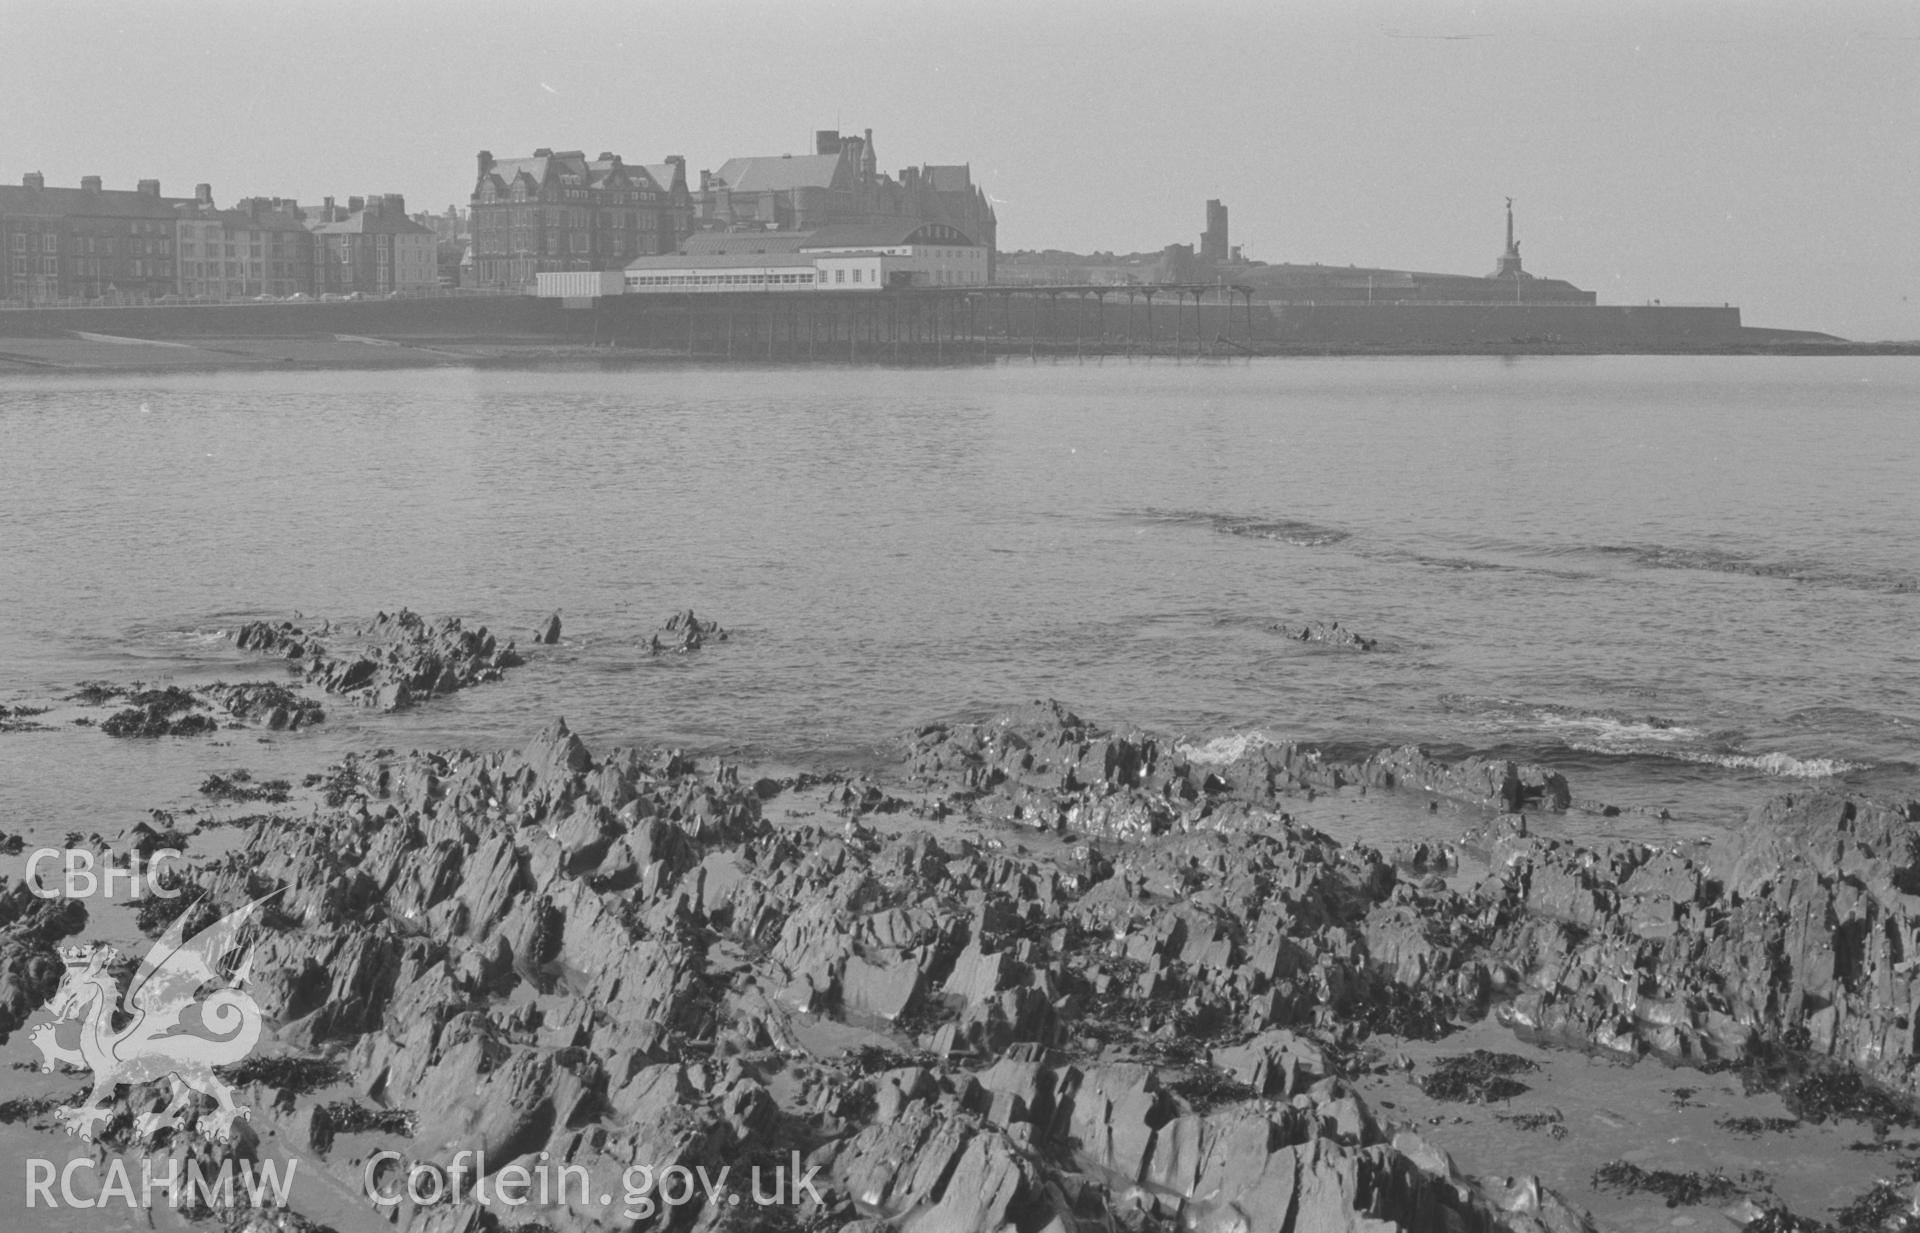 Digital copy of a black and white negative showing the pier, Hotel Cambria, Castle and War Memorial at Aberystwyth. Photographed by Arthur O. Chater on 9th April 1968 looking south south west from rocks opposite Queen's Hotel at Grid Reference SN 583 822.